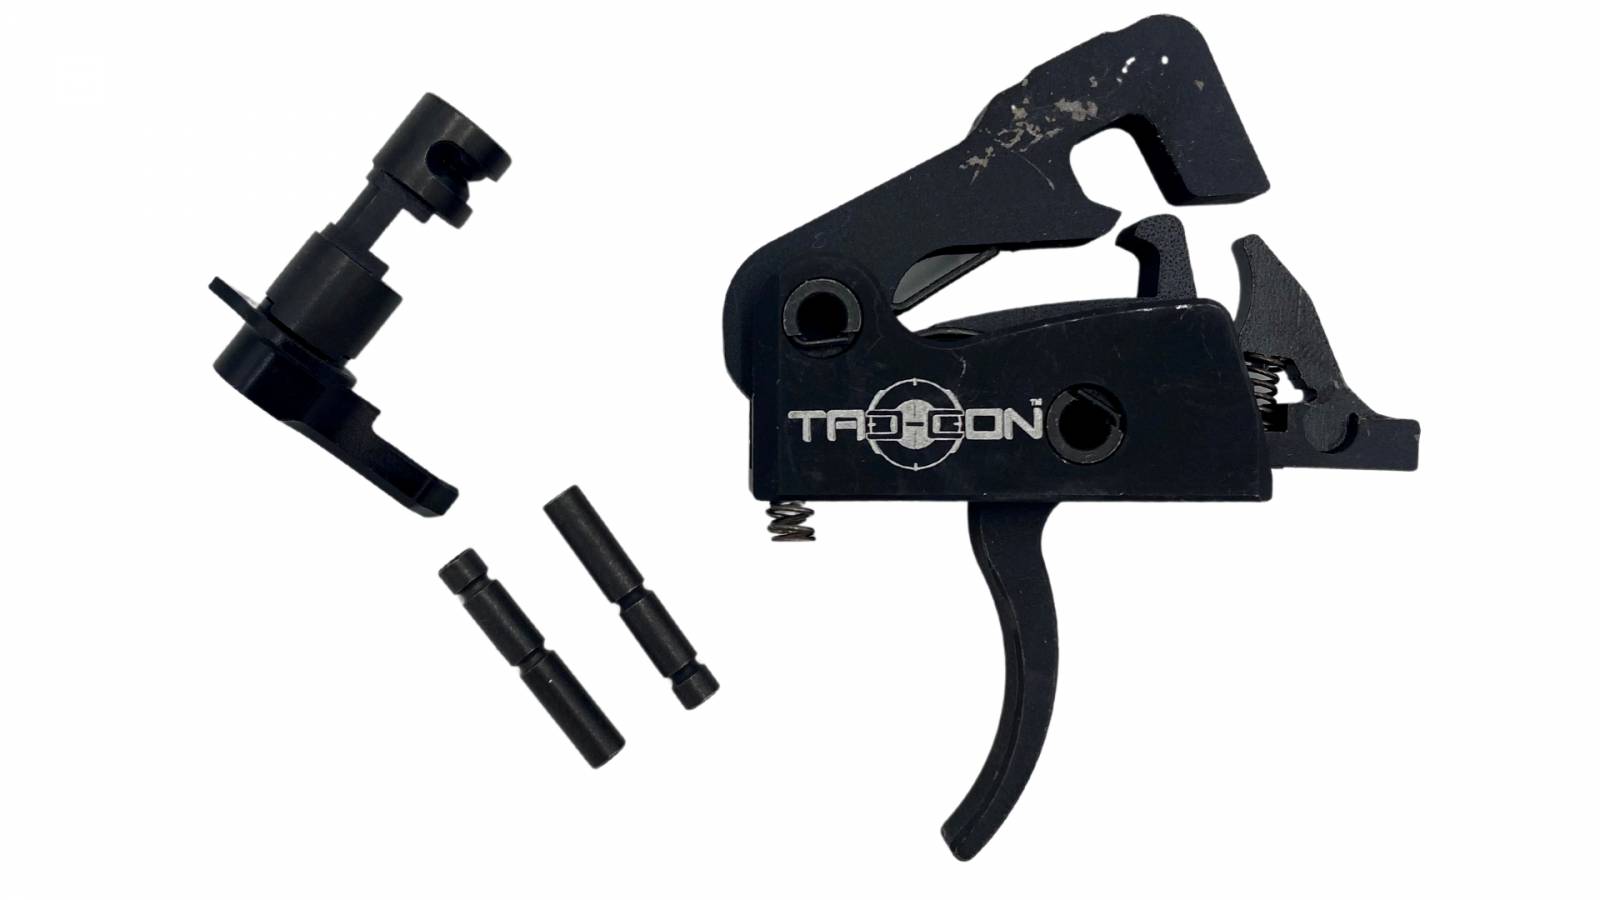 TAC-CON AR-15 3MR 3 POSITION SAFETY SELECTOR POSITIVE DISPLACEMENT